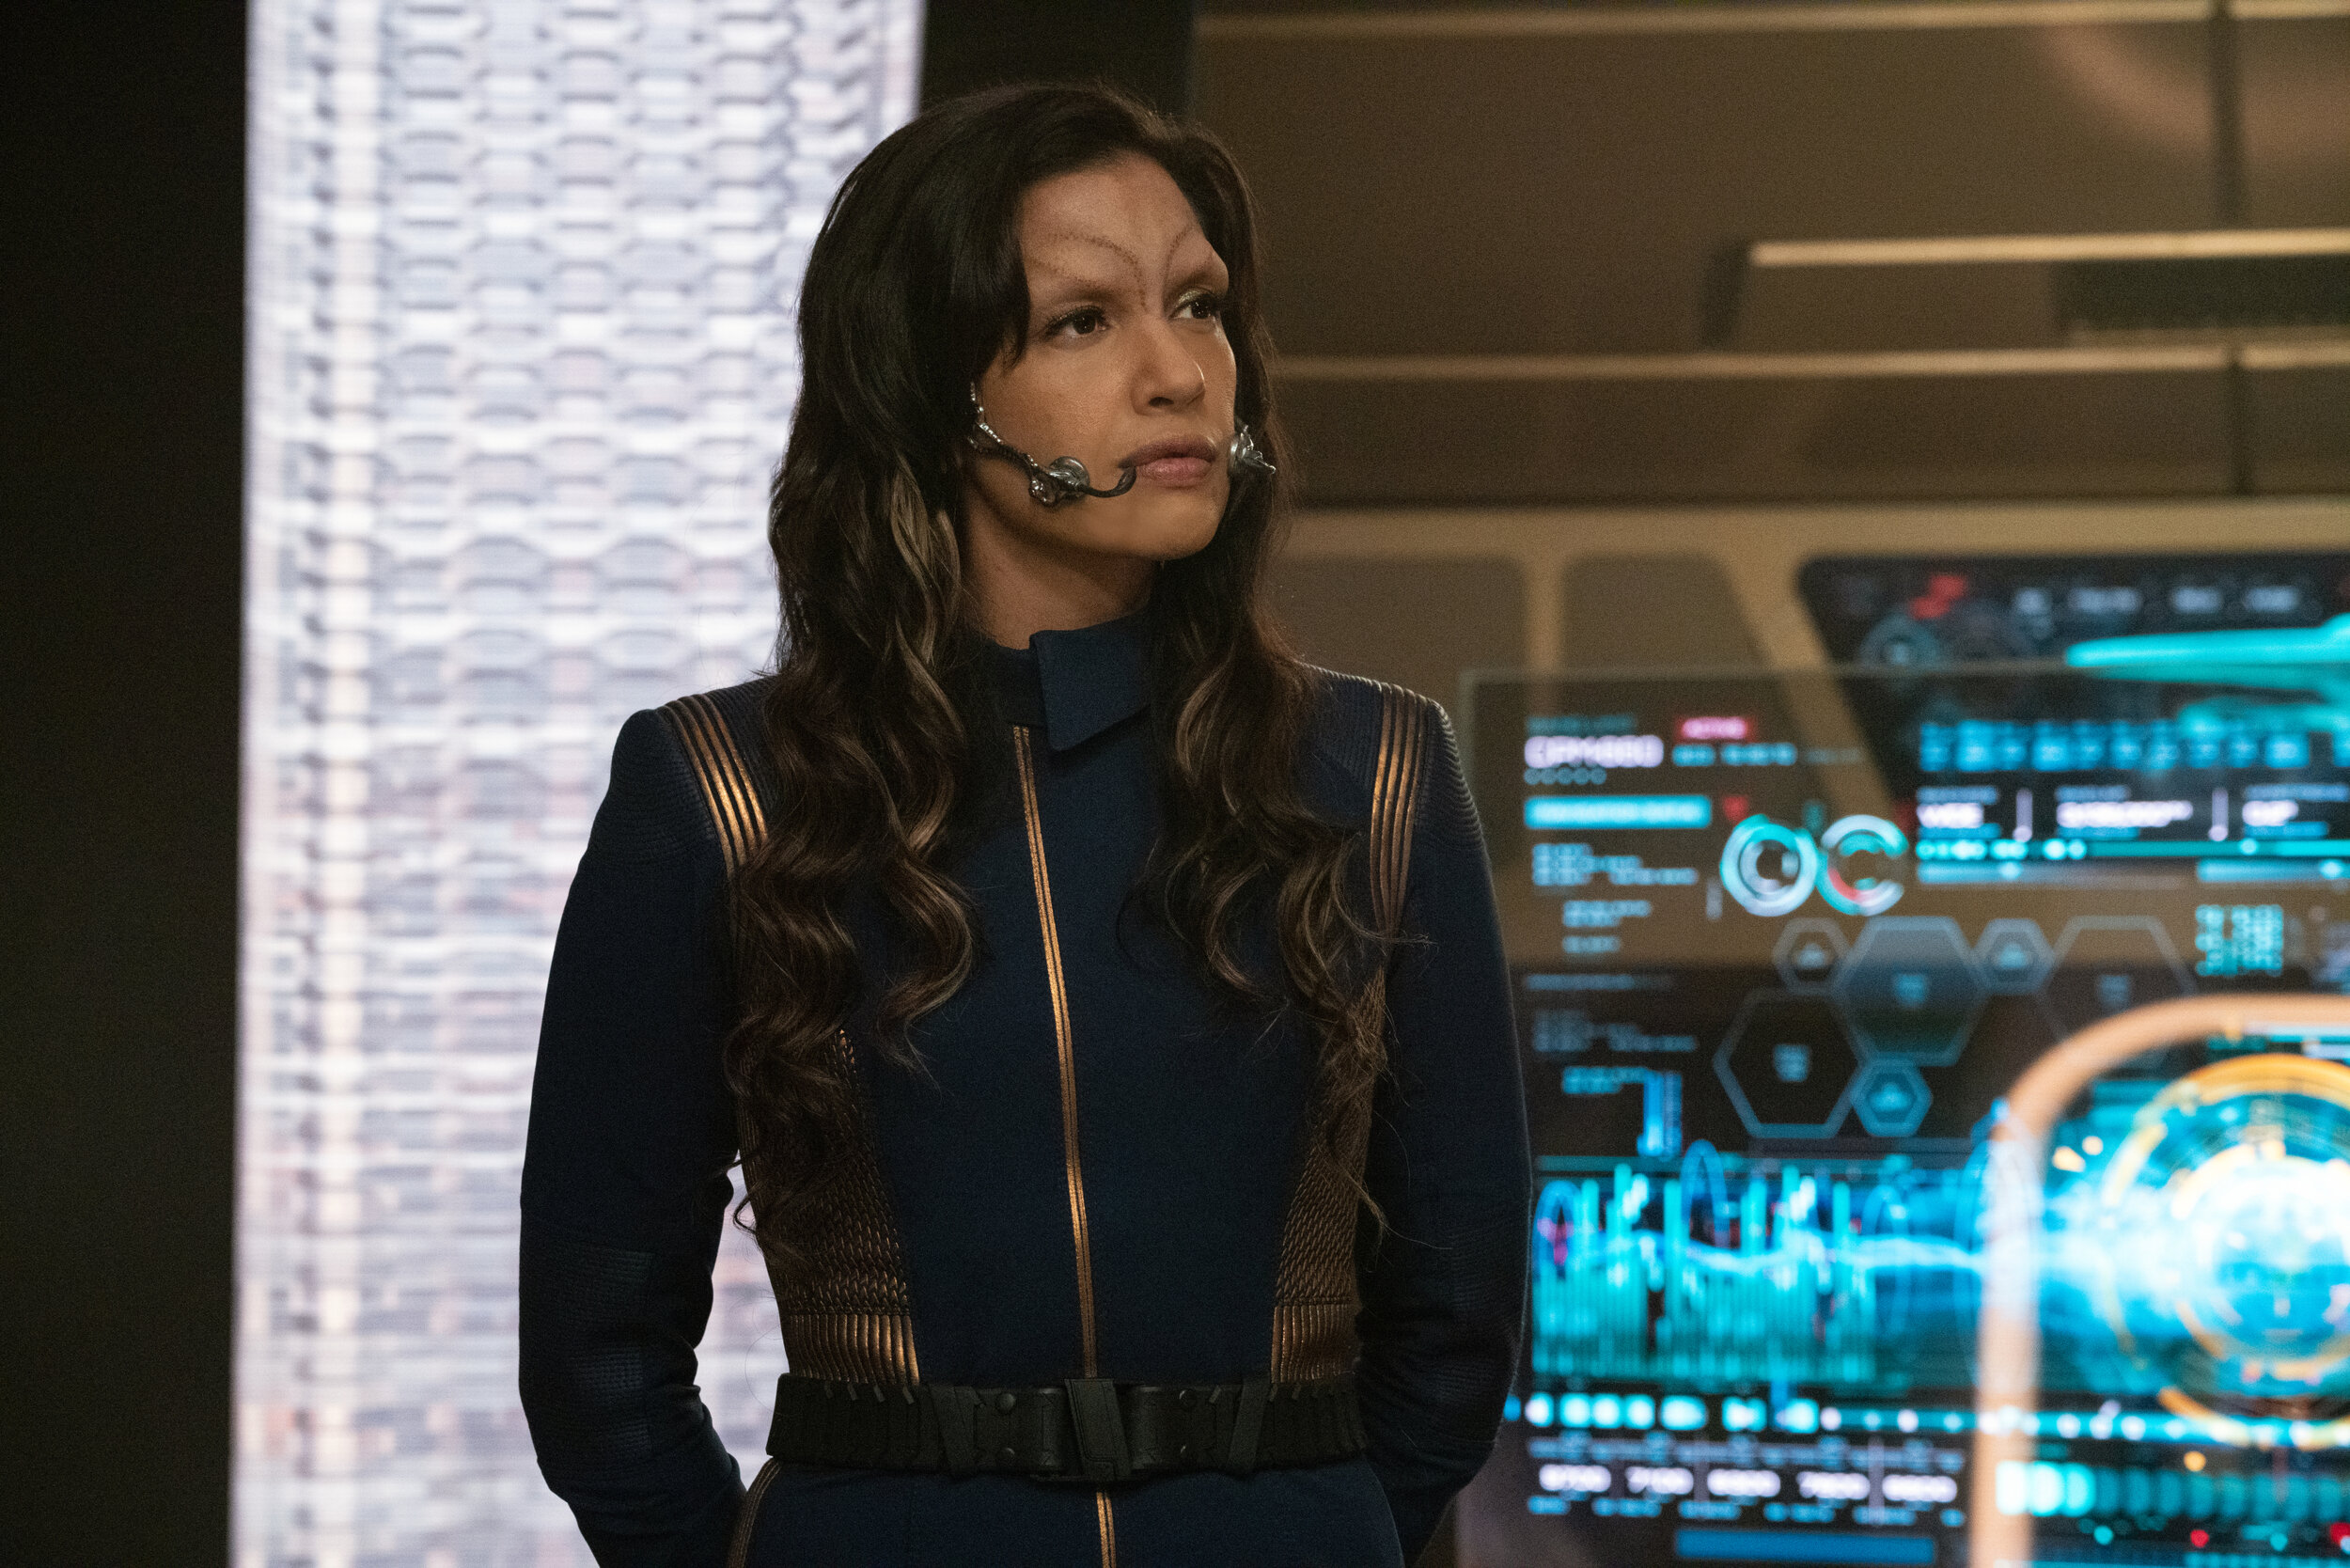   "Die Trying" -- Ep#305 -- Pictured: Rachael Ancheril as Commander Nhan of the CBS All Access series STAR TREK: DISCOVERY. Photo Cr: Michael Gibson/CBS ©2020 CBS Interactive, Inc. All Rights Reserved.  